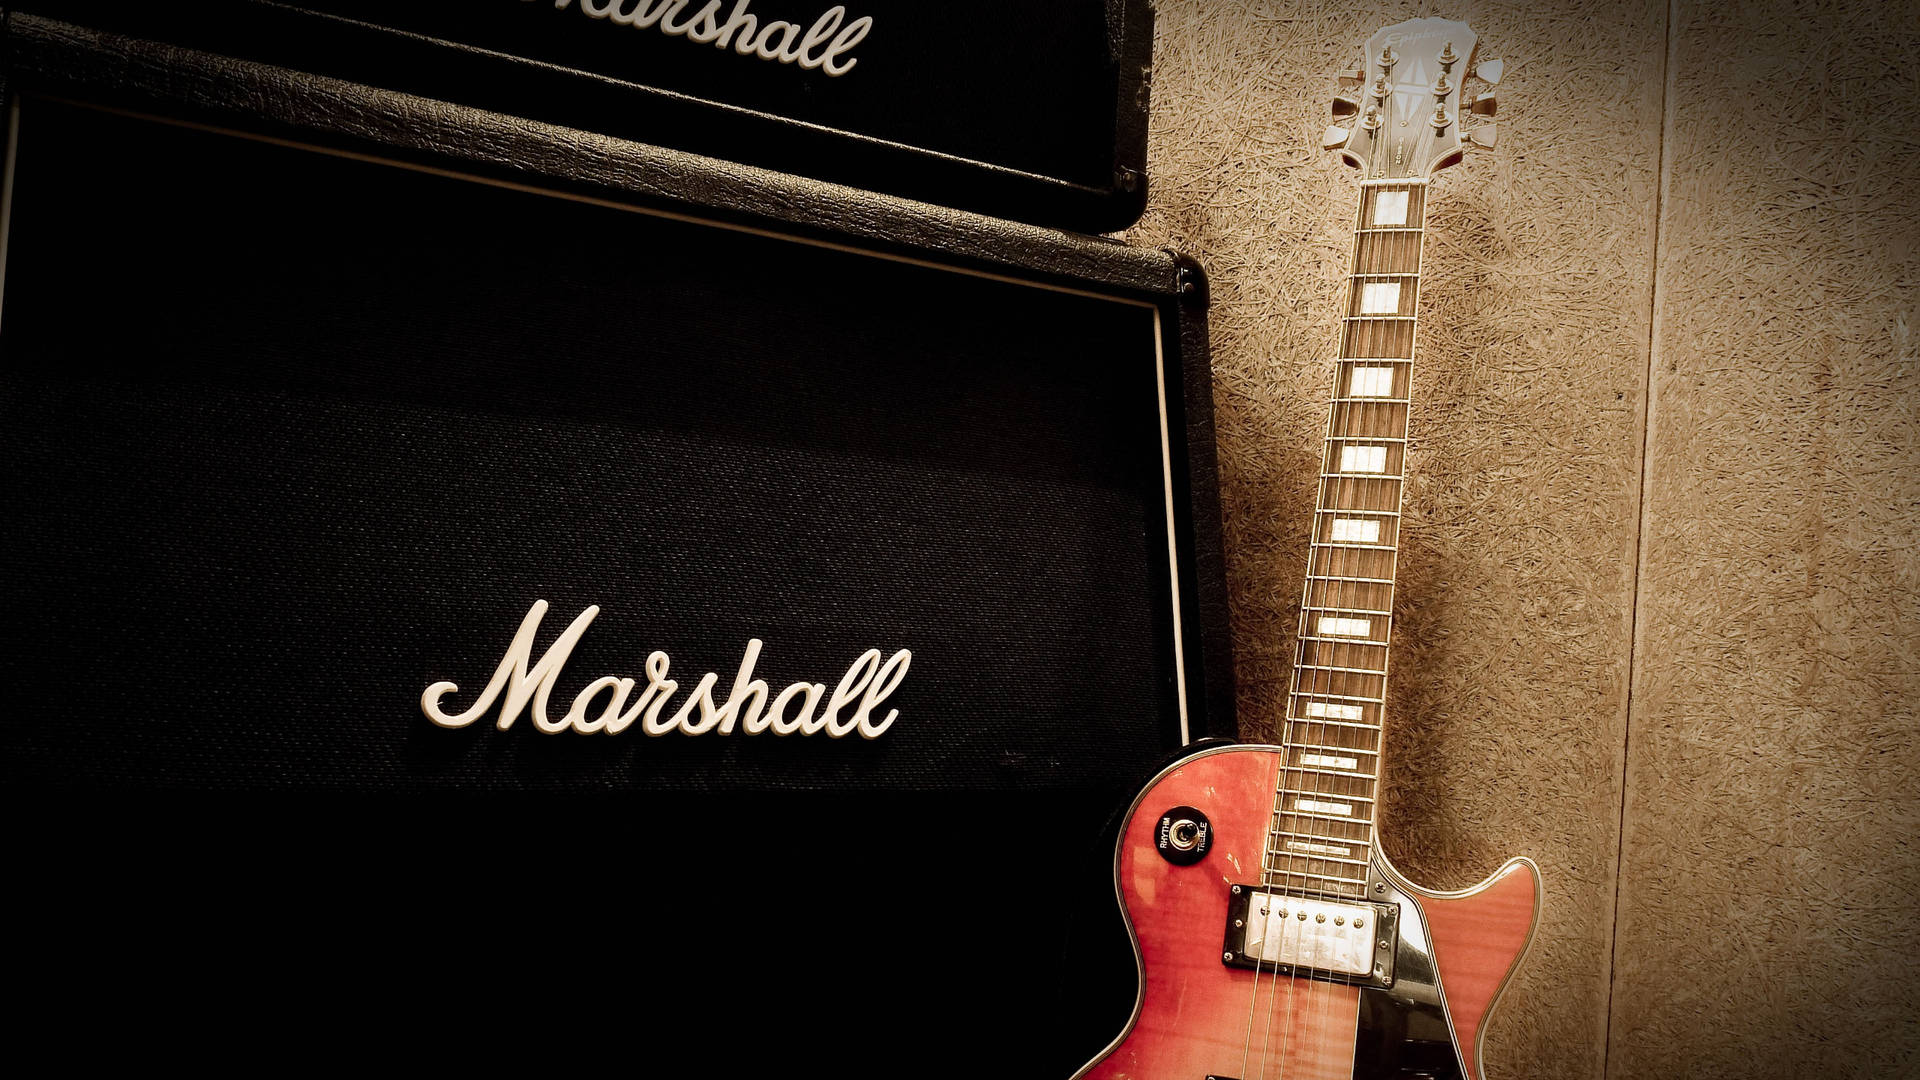 Marshall Amplifier With Gibson Guitar Background